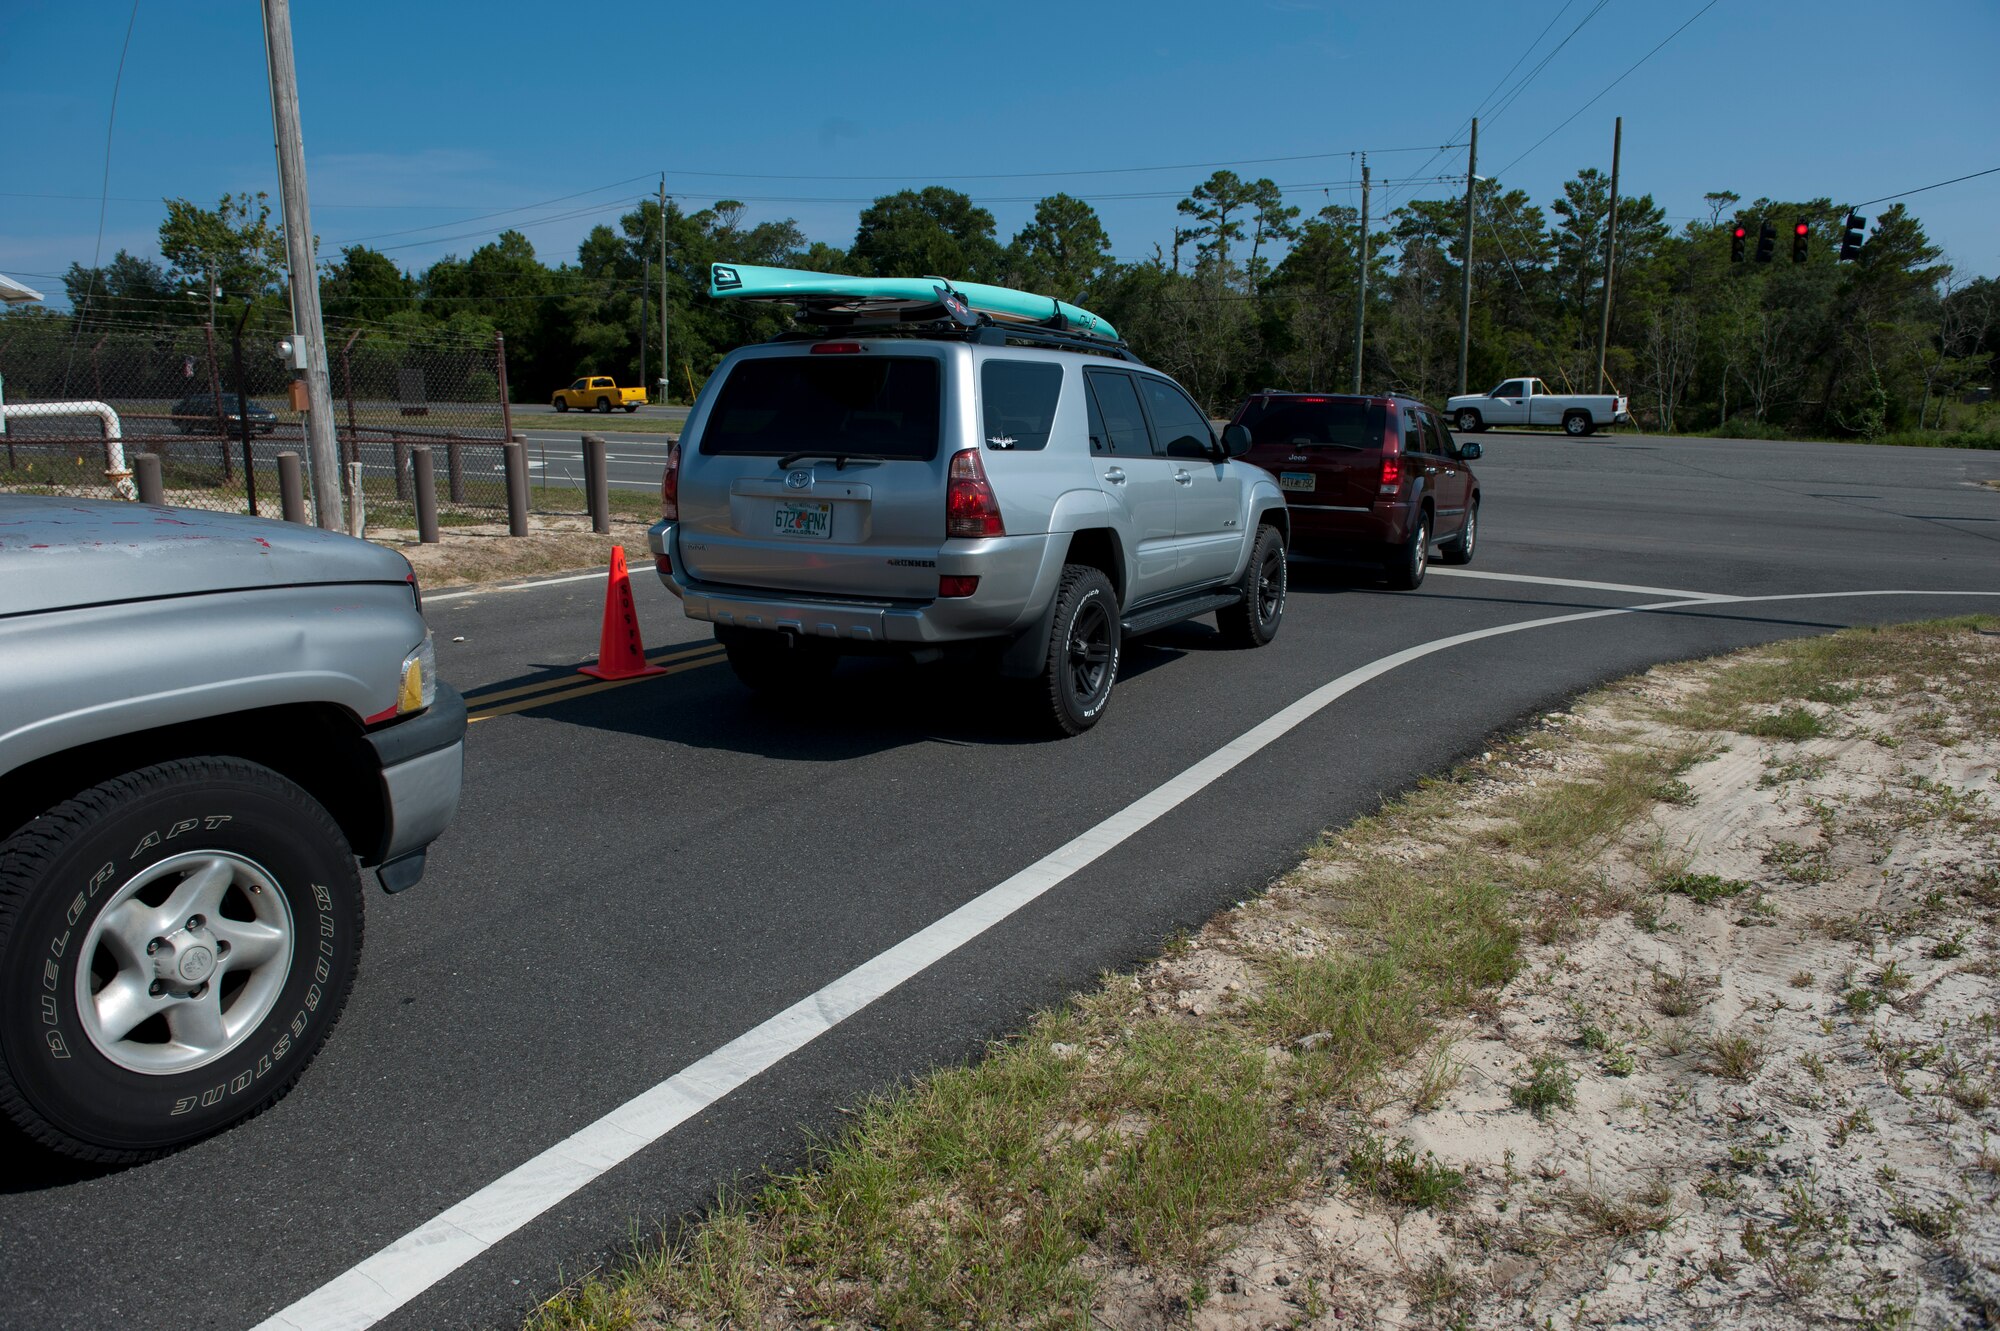 Cars wait to turn onto U.S. Highway 98 at the Kerwood Gate on Hurlburt Field, Fla., Aug. 8, 2014. The traffic light at the gate allows vehicles to exit the installation and go either westbound or eastbound onto U.S. Highway 98. (U.S. Air Force photo/Senior Airman Krystal Garrett)